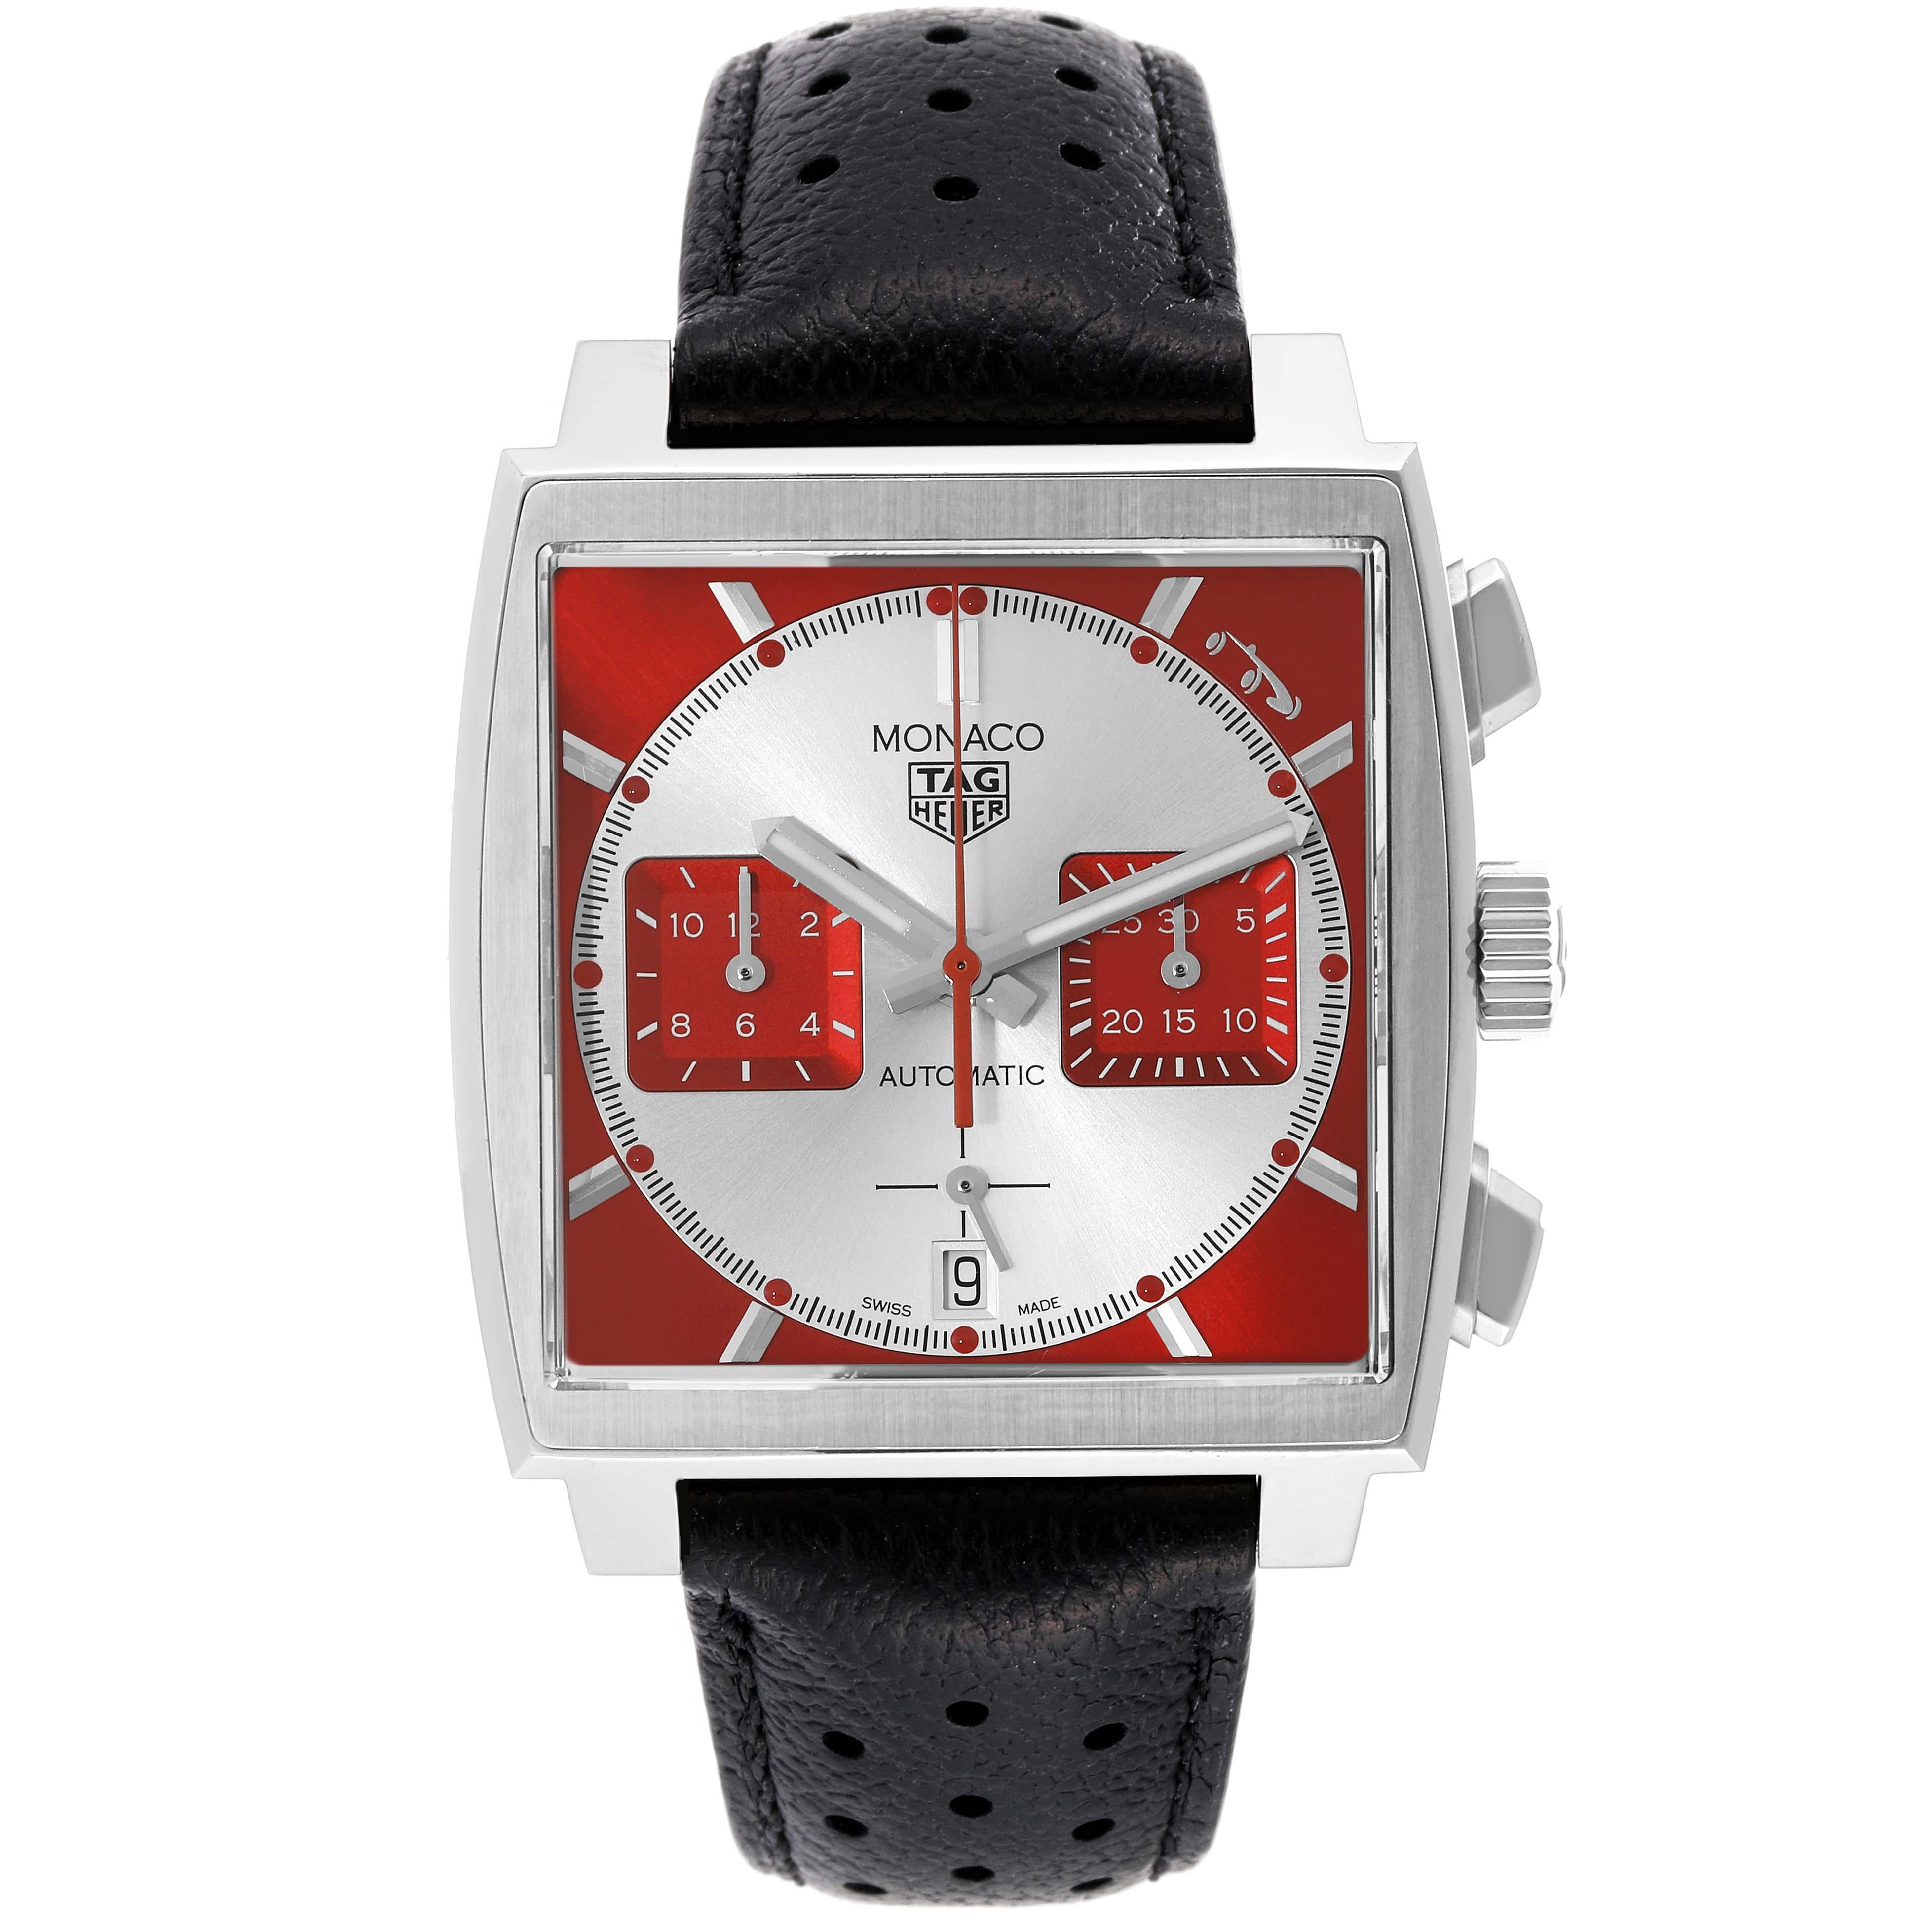 Tag Heuer Grand Prix De Monaco Historique LE Steel Mens Watch CBL2114 Box Card. Automatic self-winding movement, Caliber Heuer 02 with 80hr power reserve. Stainless steel 39 mm square case. Exhibition sapphire case back printed with 